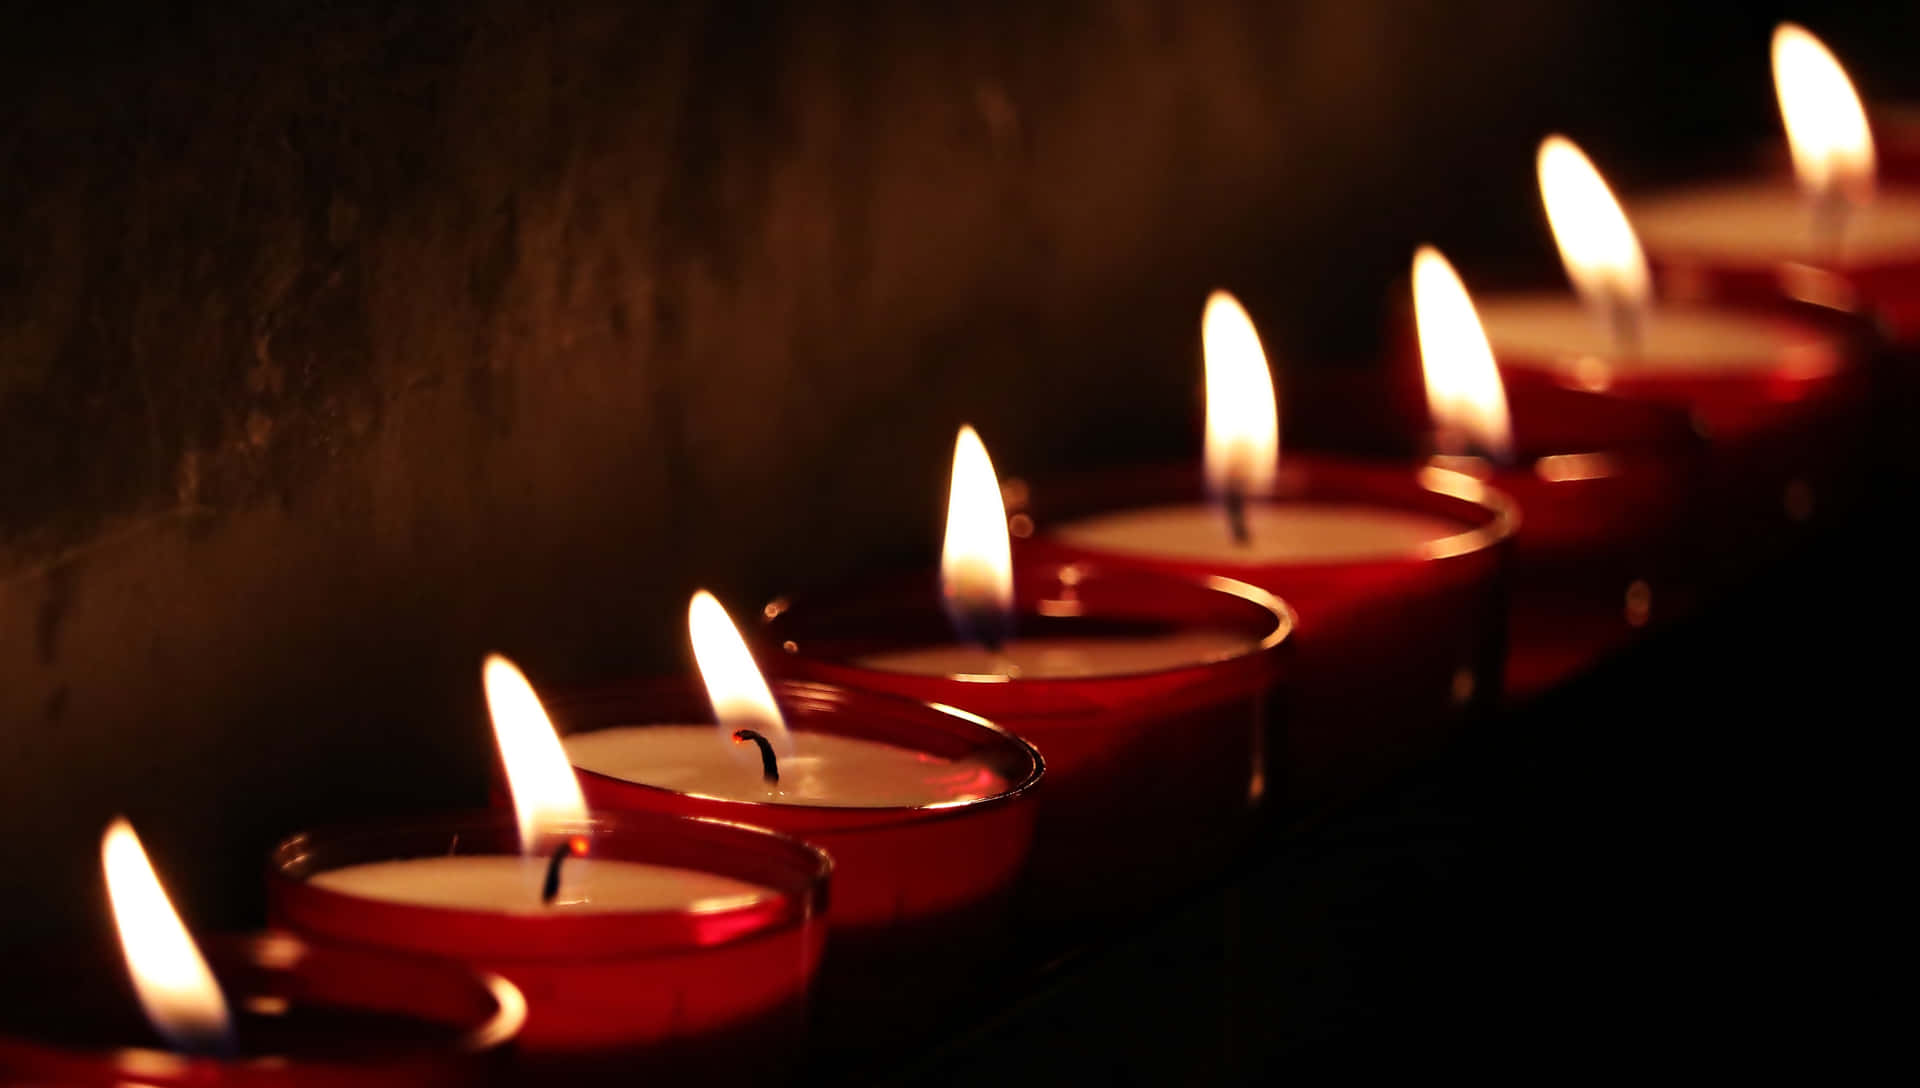 A Row Of Red Candles Lit Up In The Dark